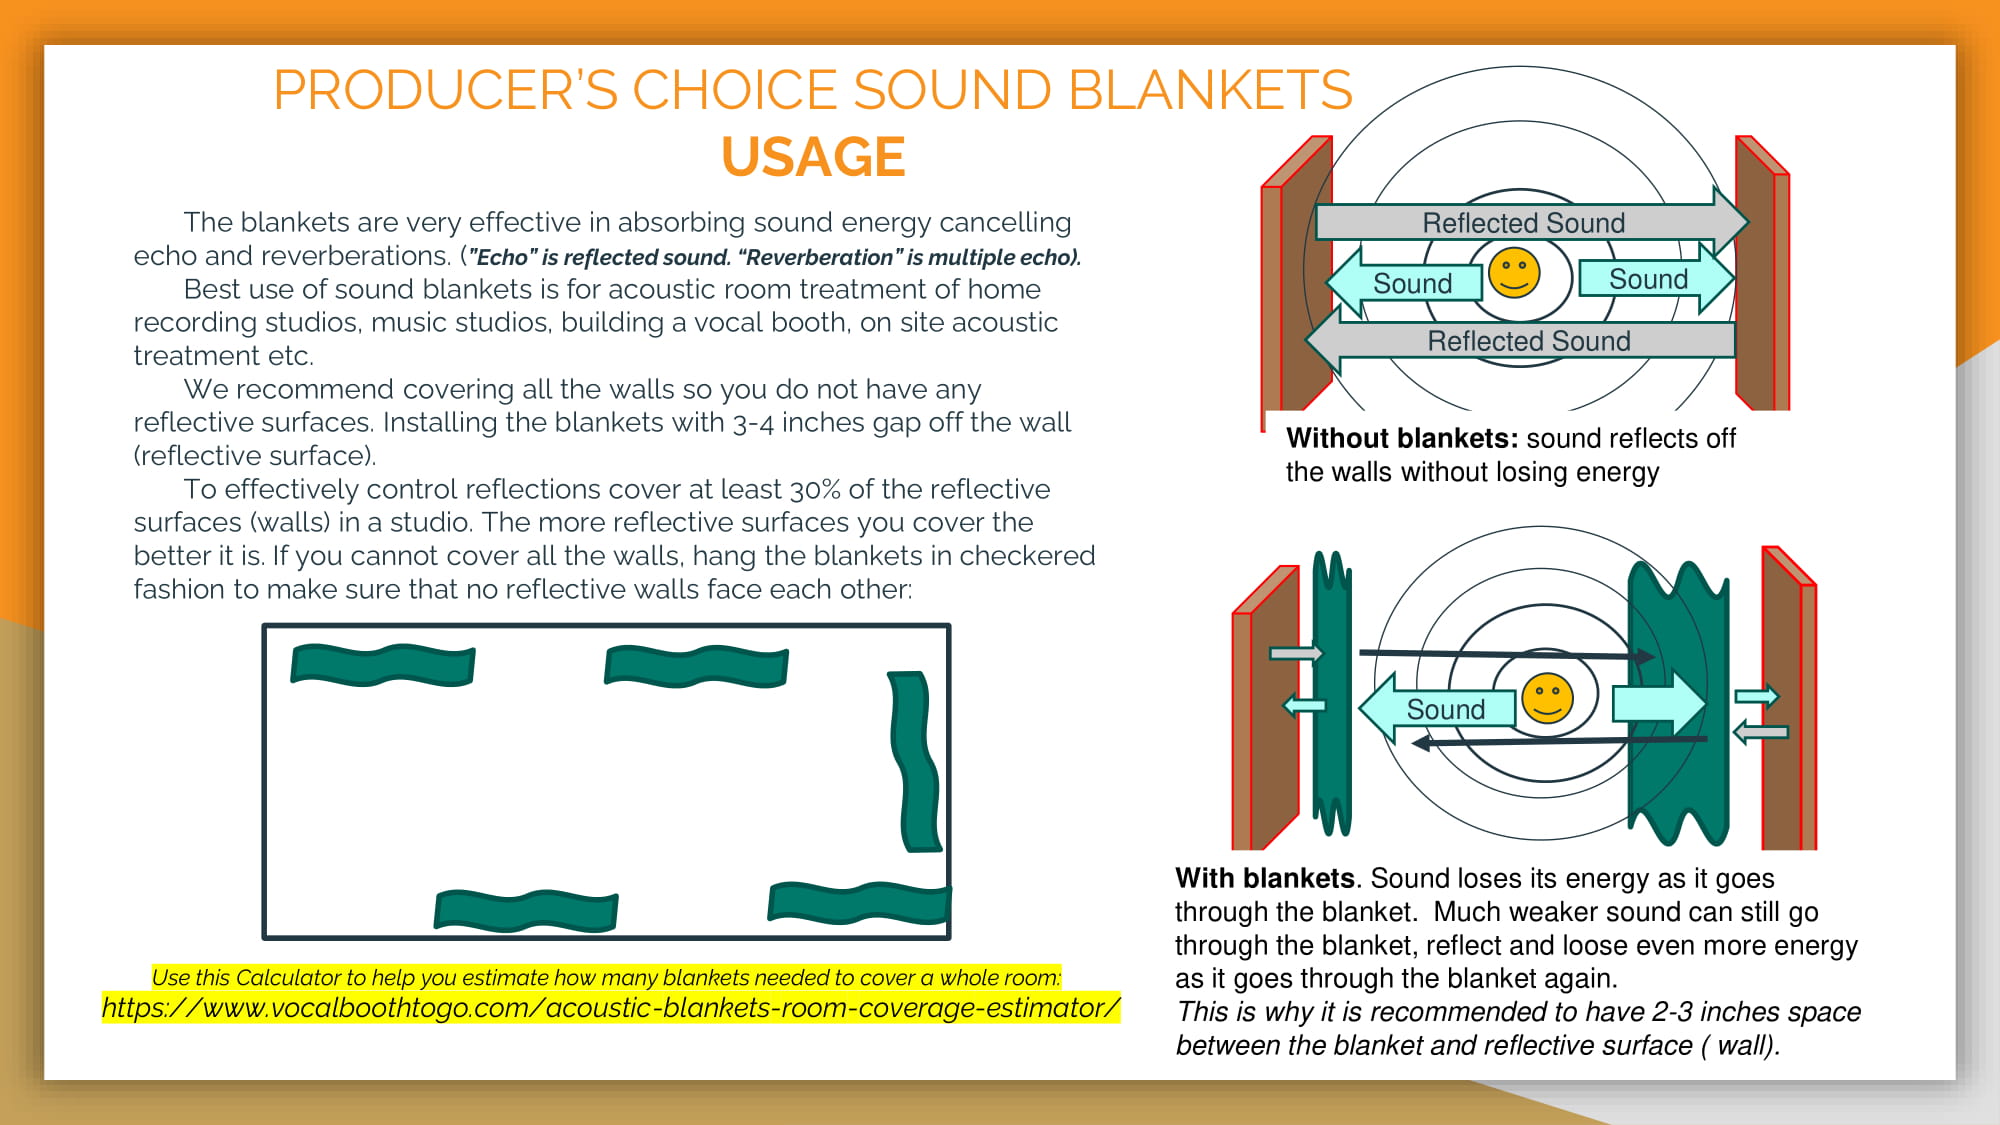 PRODUCER’S CHOICE SOUND BLANKETS USAGE